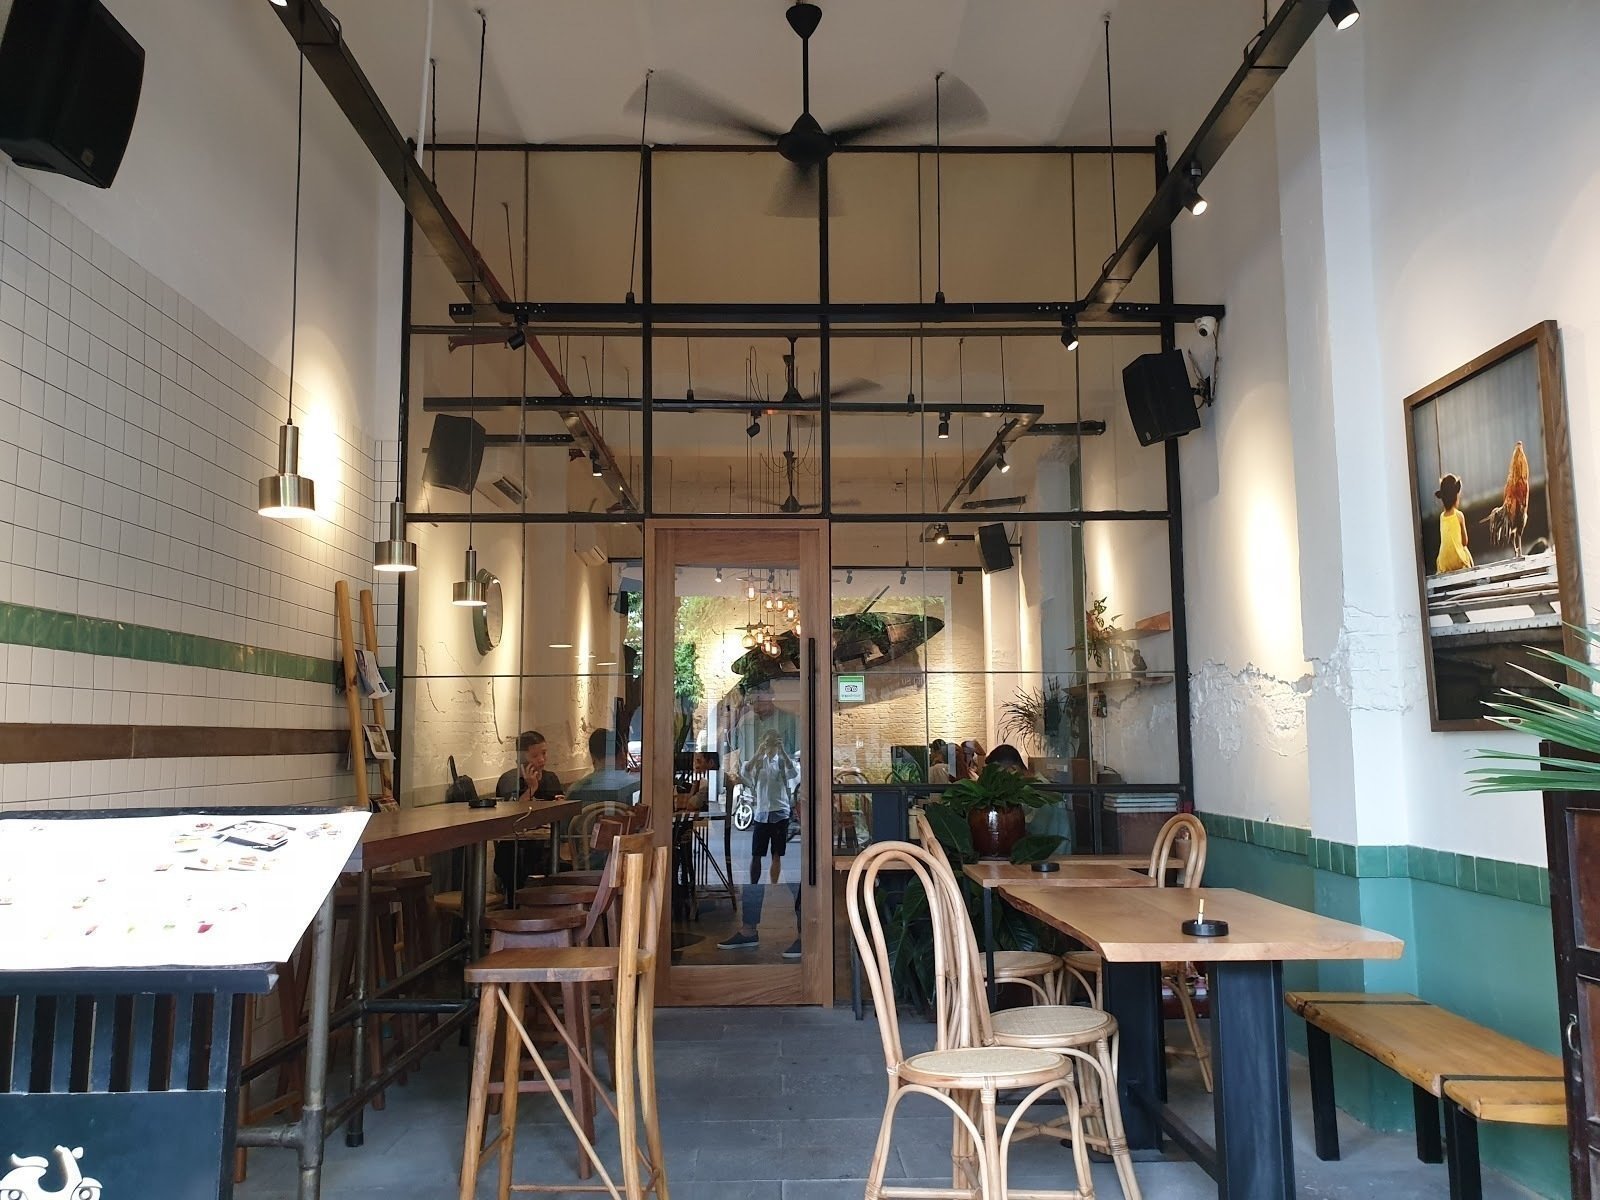 <span class="translation_missing" title="translation missing: en.meta.location_title, location_name: M2C cafe, city: Ho Chi Minh City">Location Title</span>